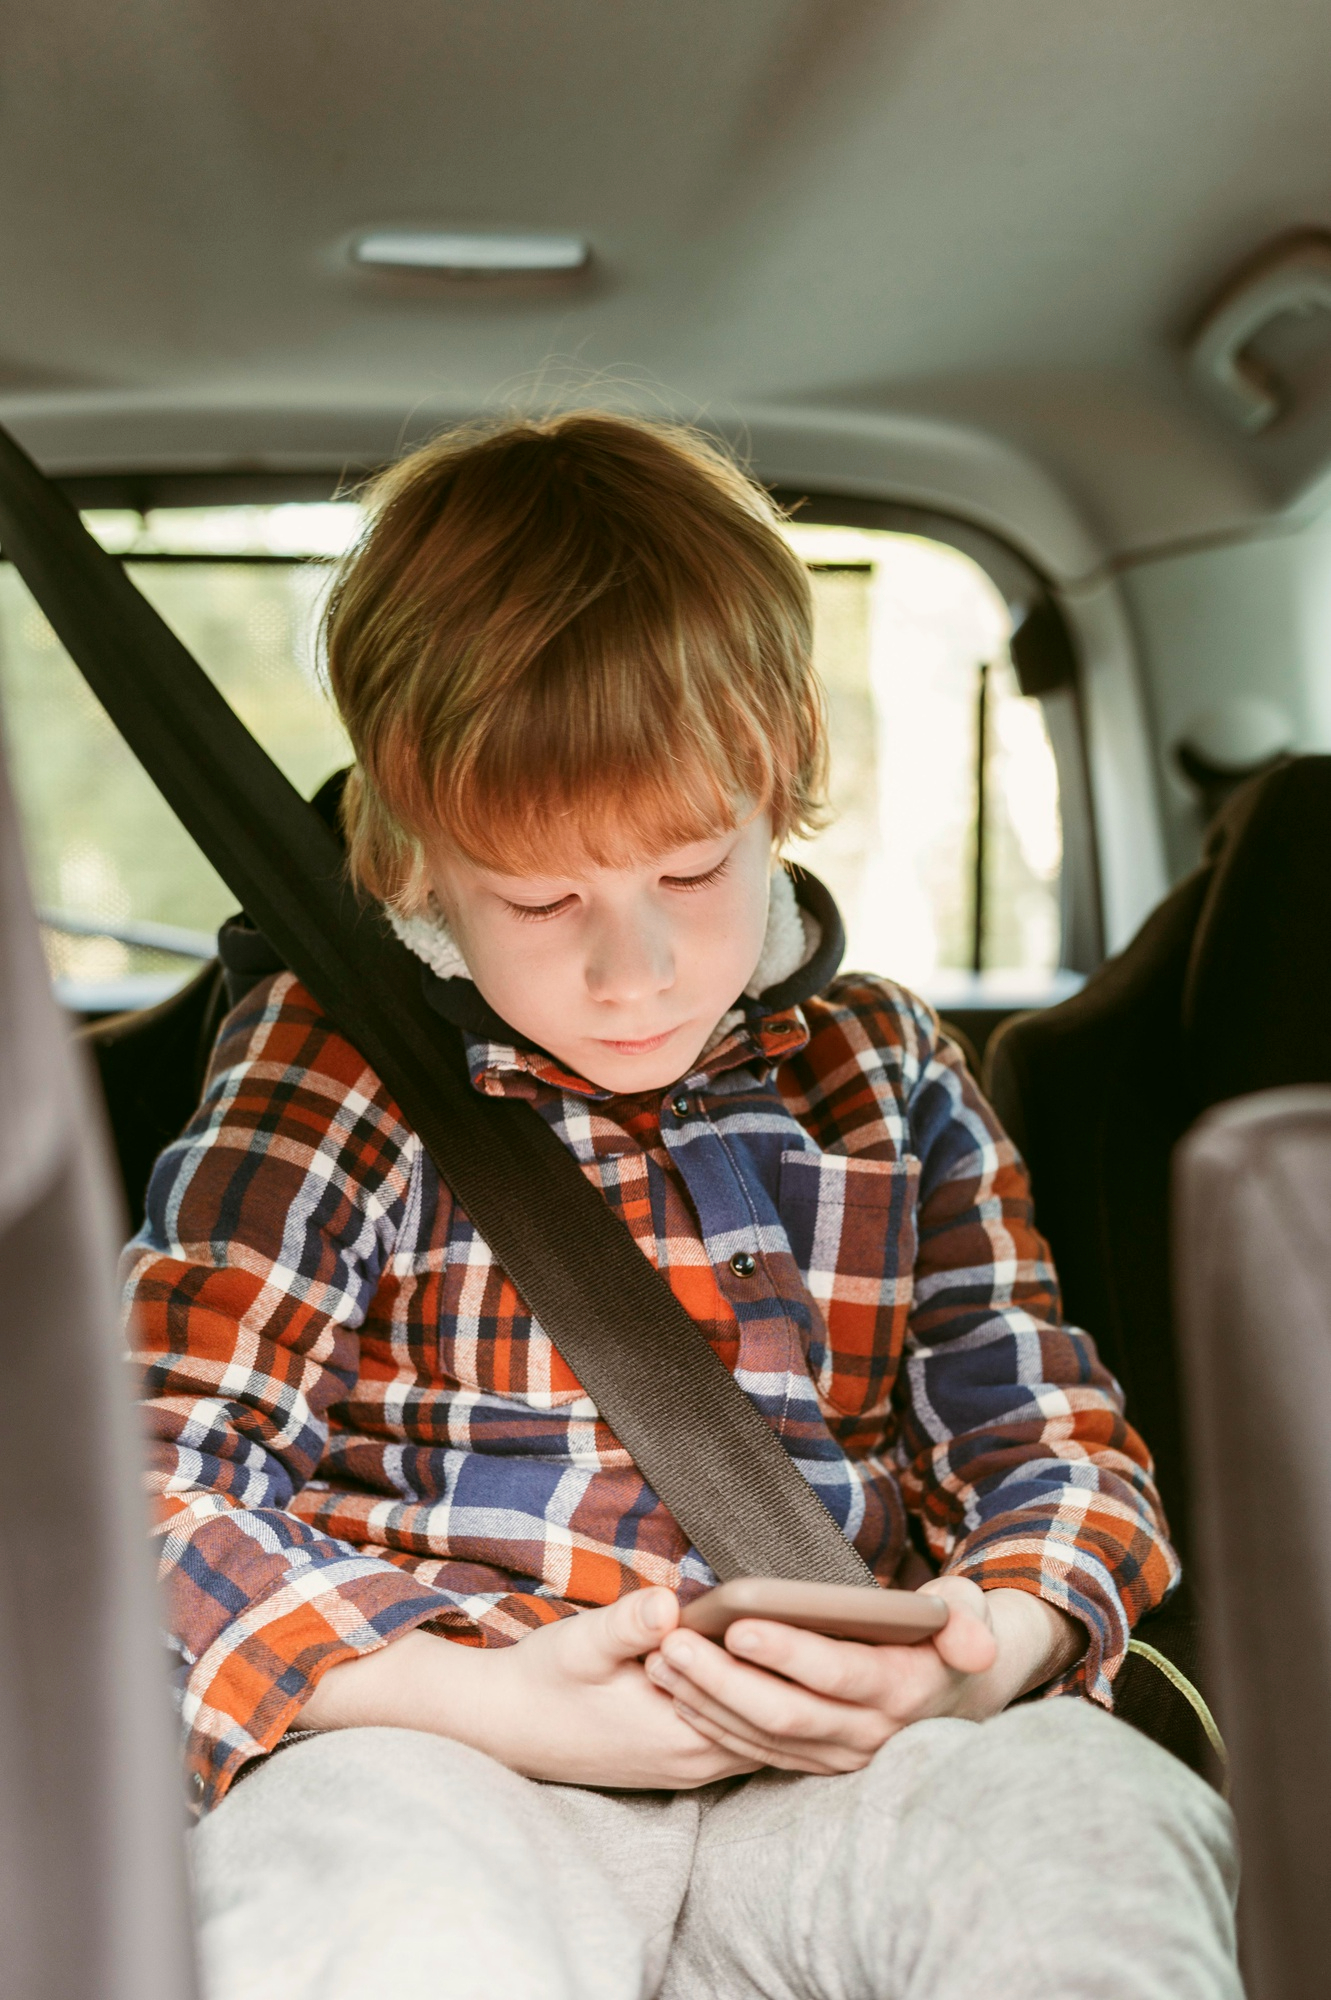 A little boy focused on a phone in the backseat of a car | Source: Freepik